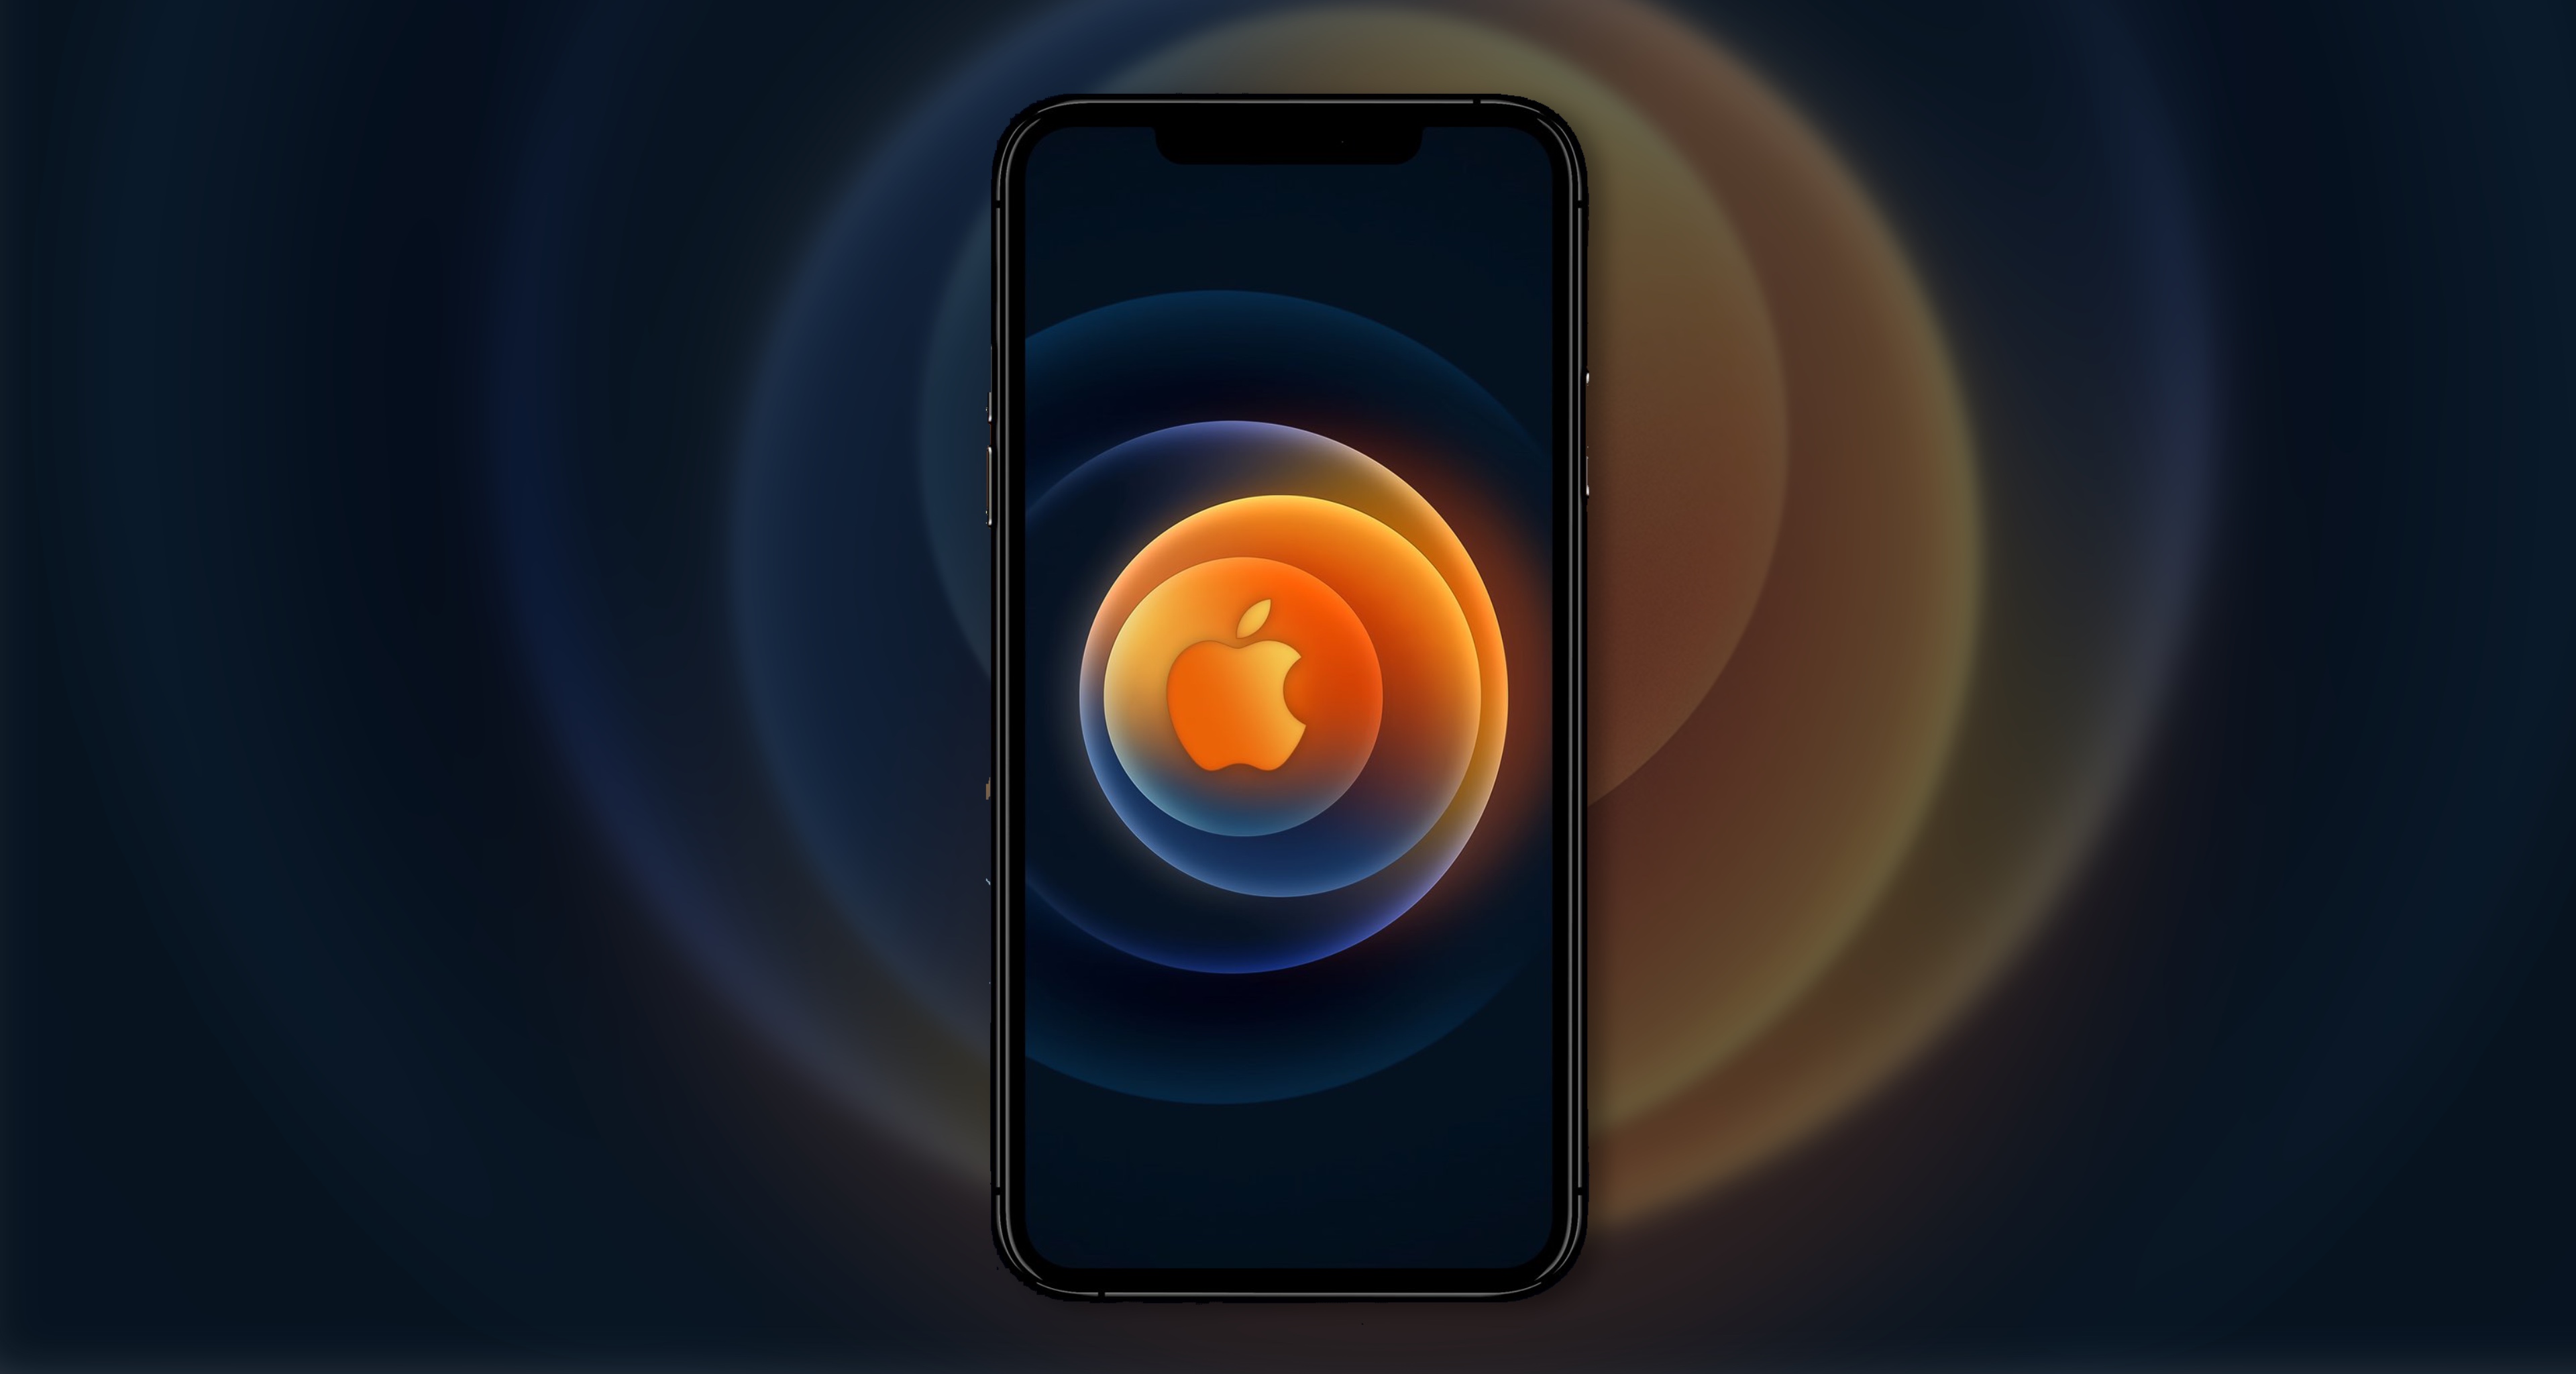 Apple Event 2020 Wallpapers